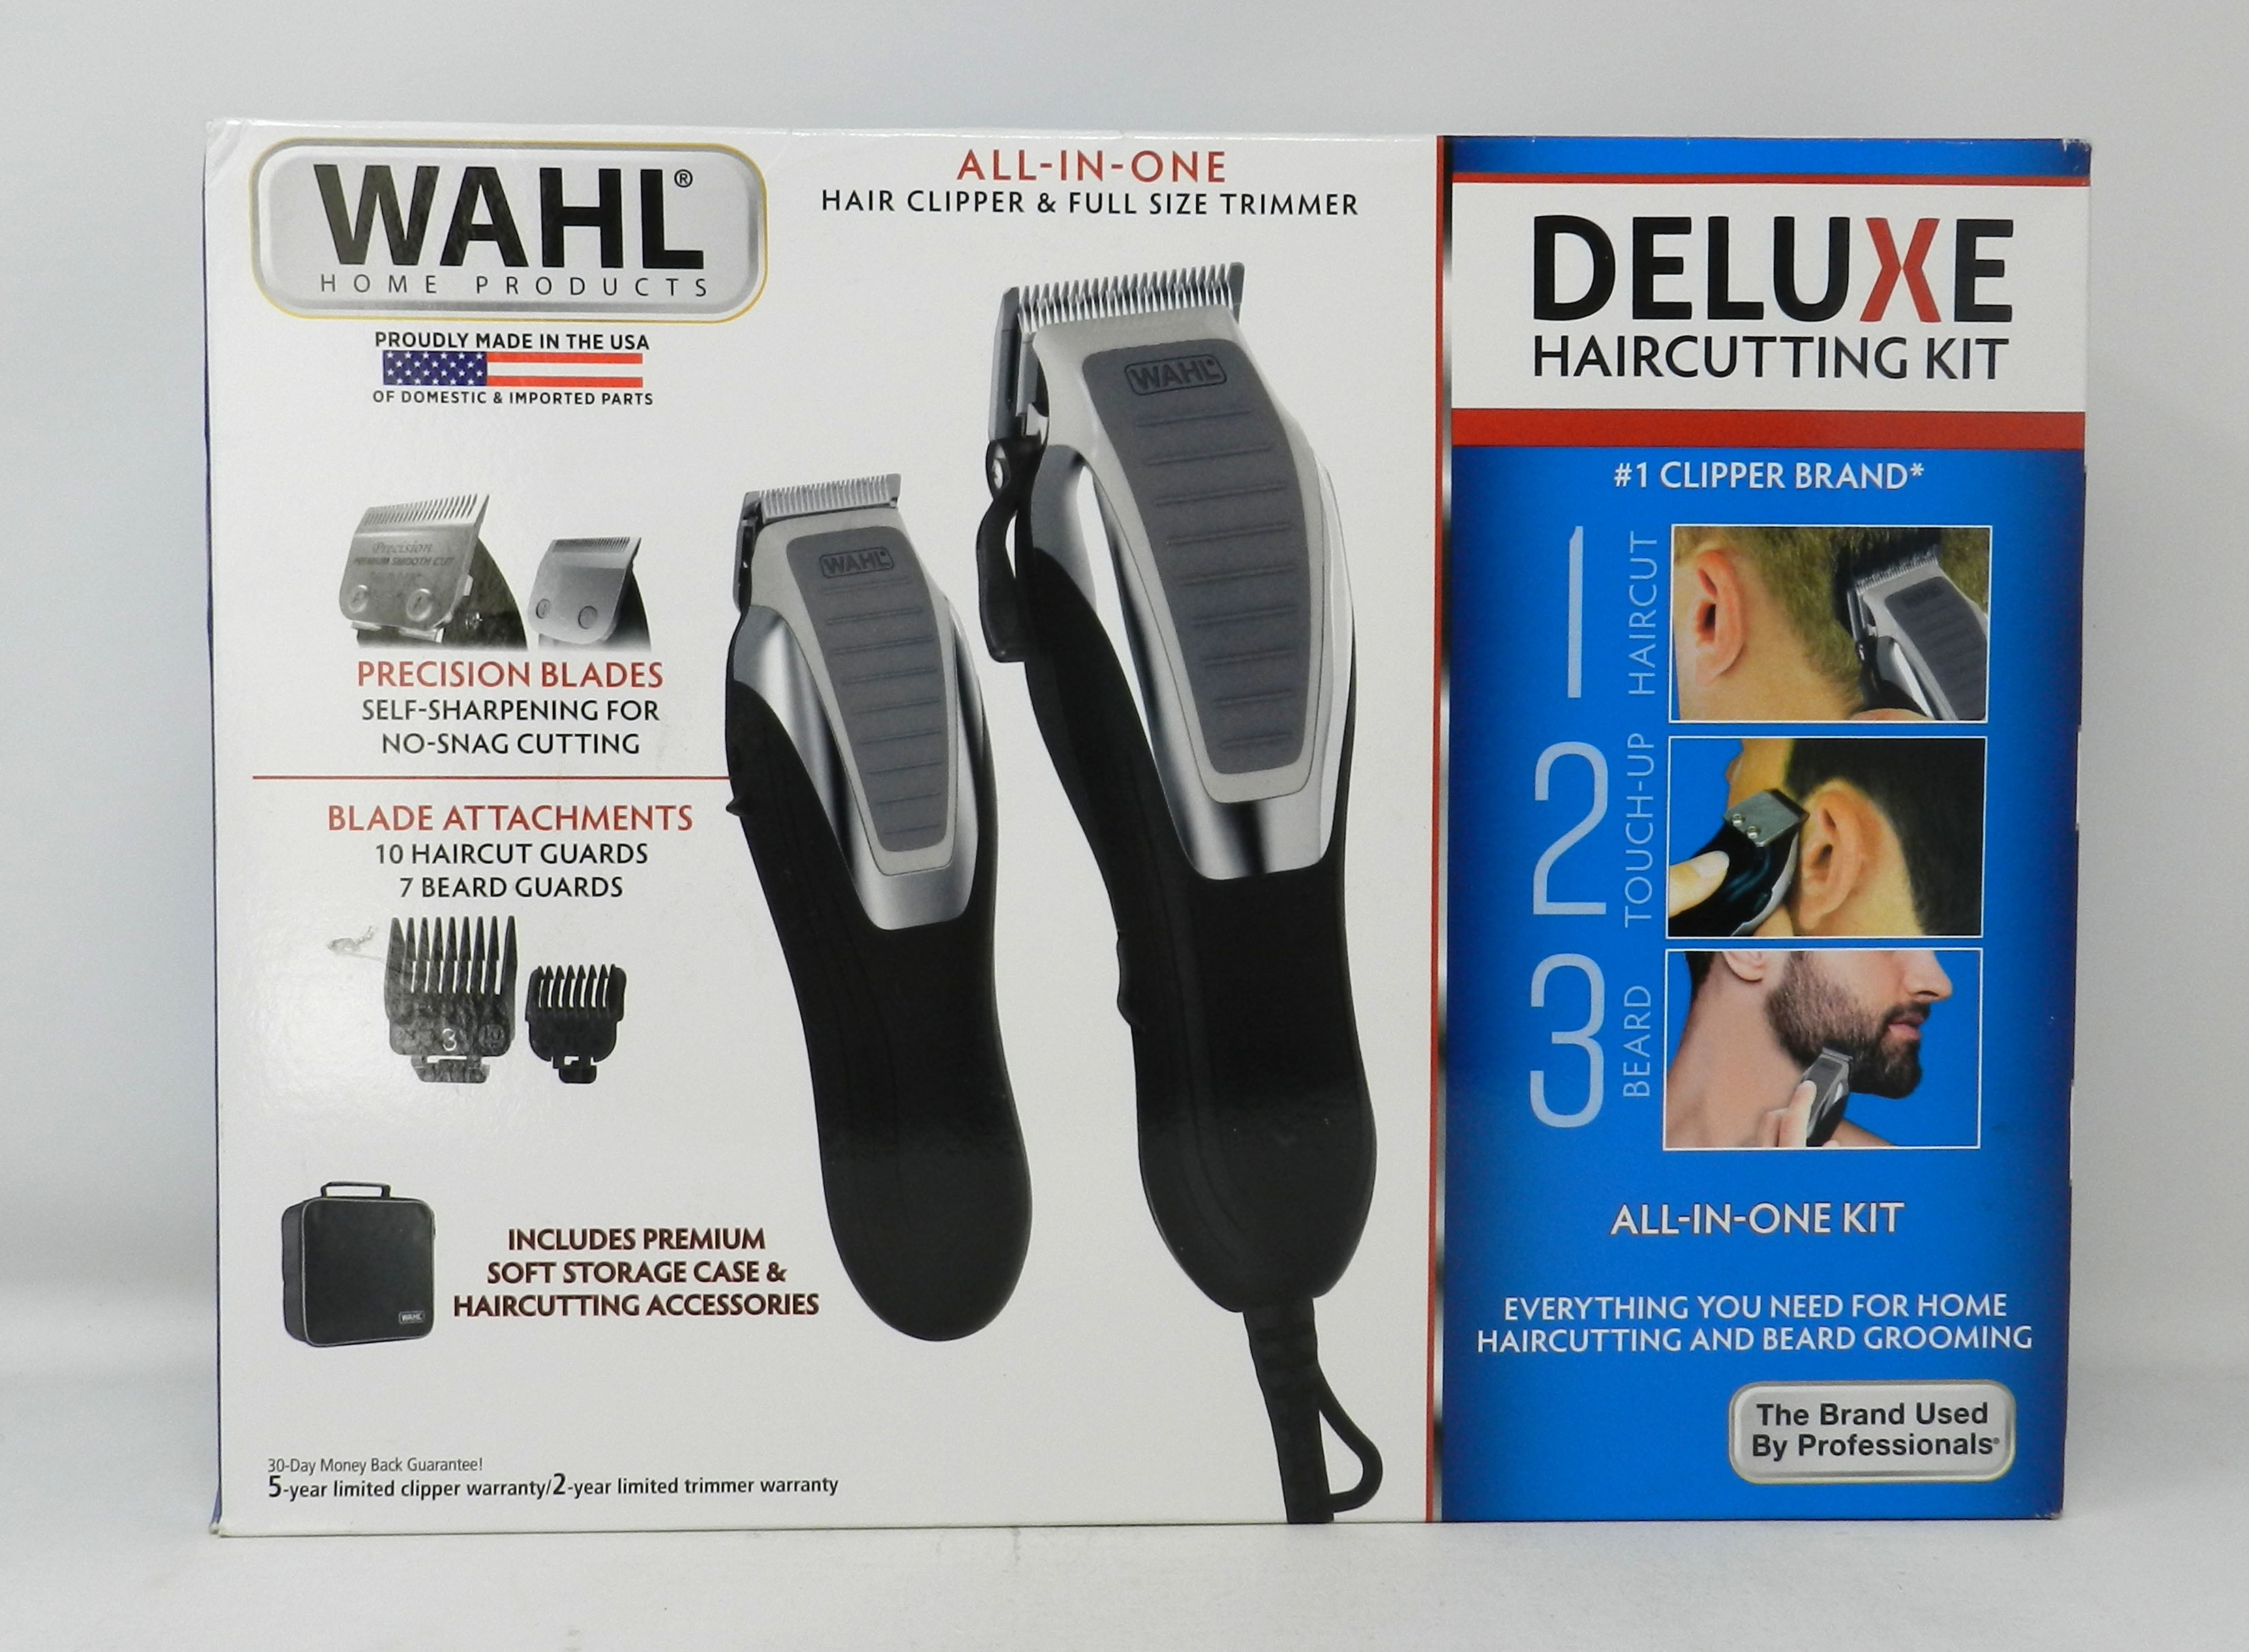 WAHL Deluxe HairCutting Kit All-In-One 